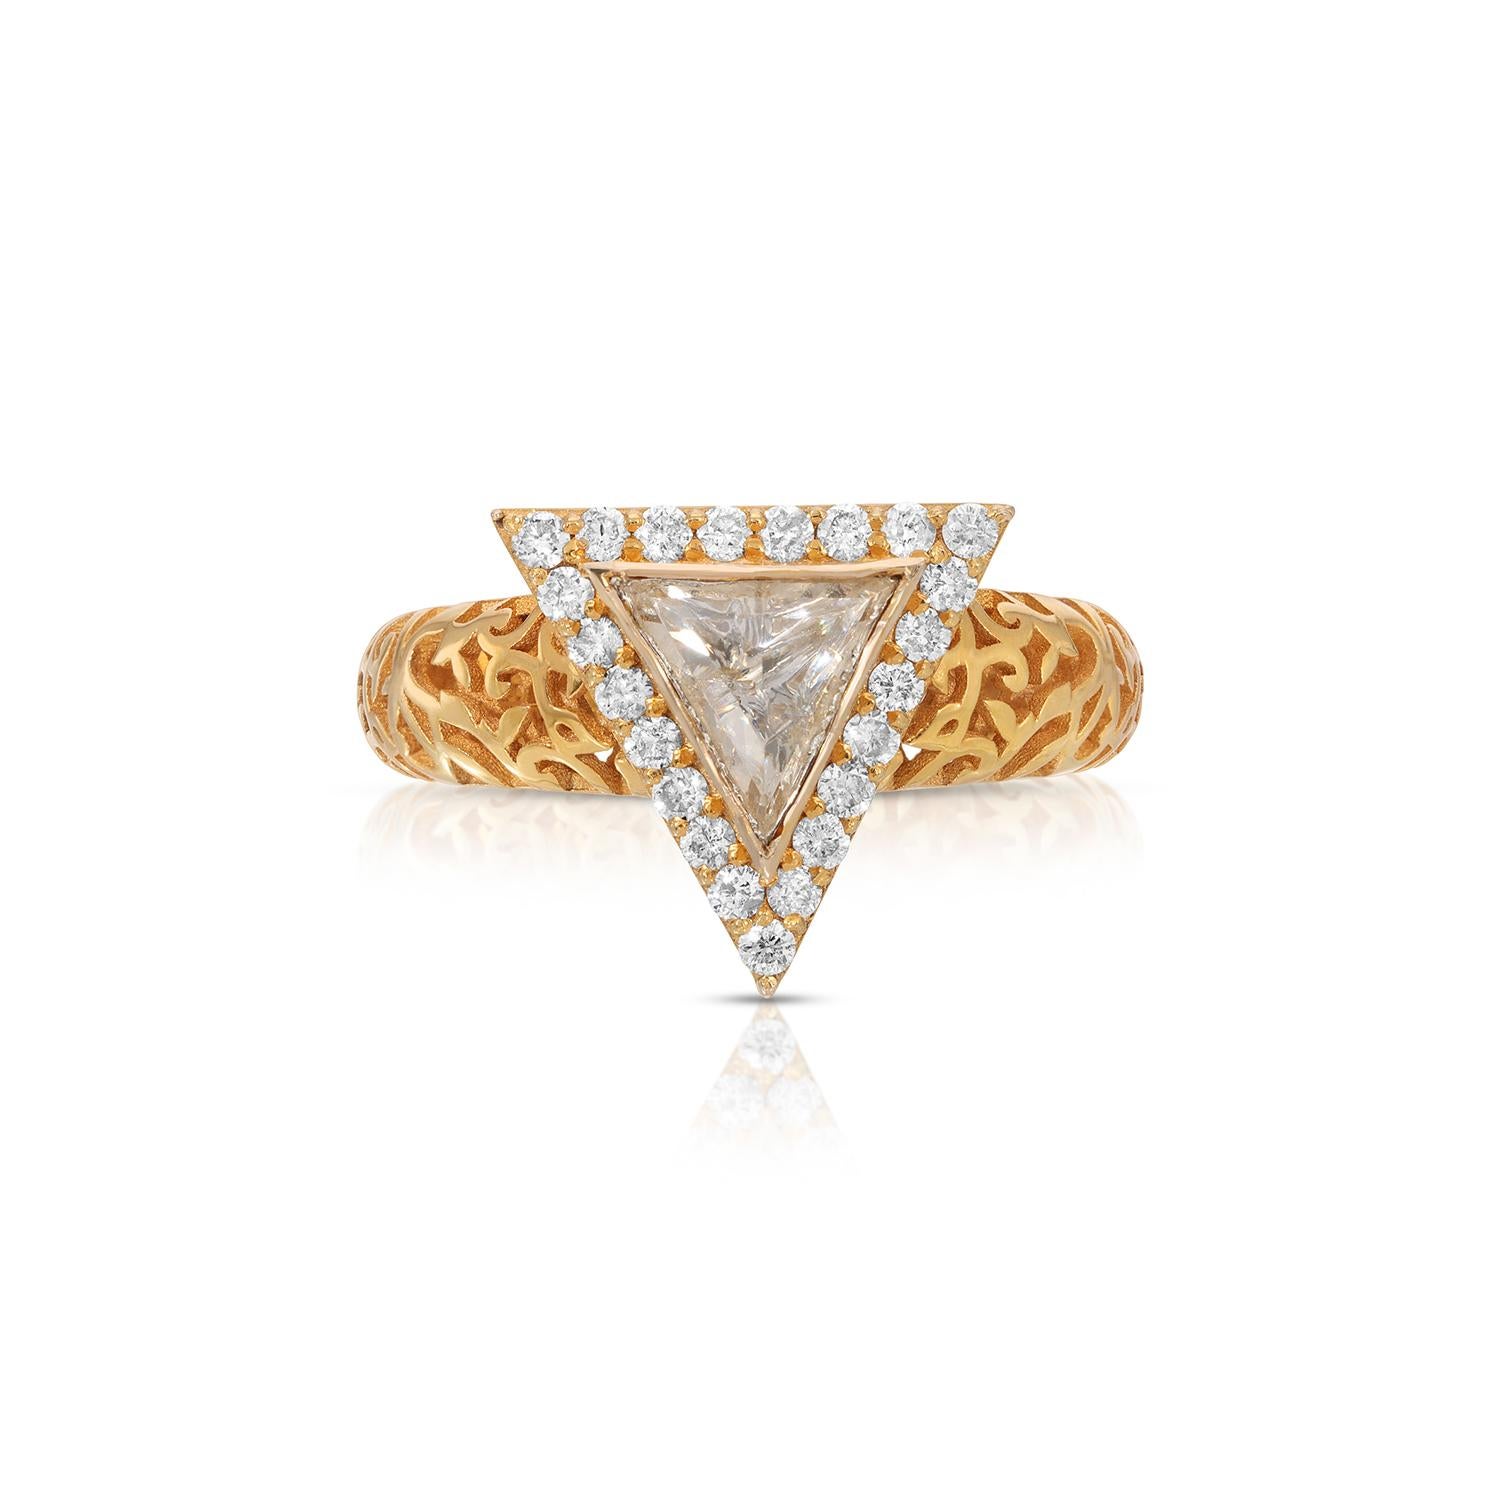 Diamond Triage Filigree Dress Ring. A stunningly beautiful dress ring featuring a rose cut diamond of exceptional color and clarity in a triangular cut set with brilliant cut diamonds in a hand crafted gold filigree gold band. A truly gorgeous ring